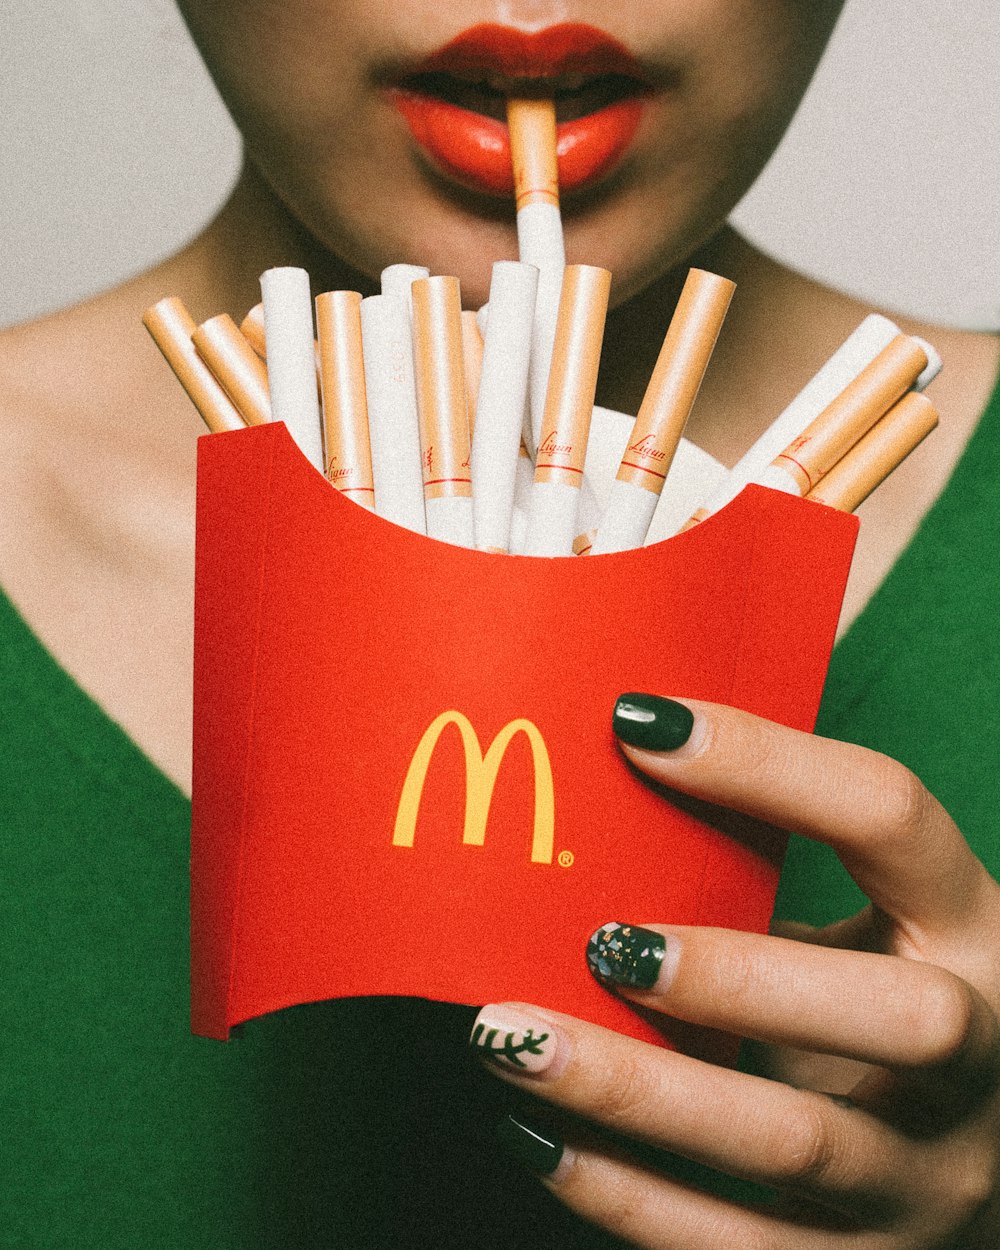 woman holding McDonald's fries pack filled with cigarettes